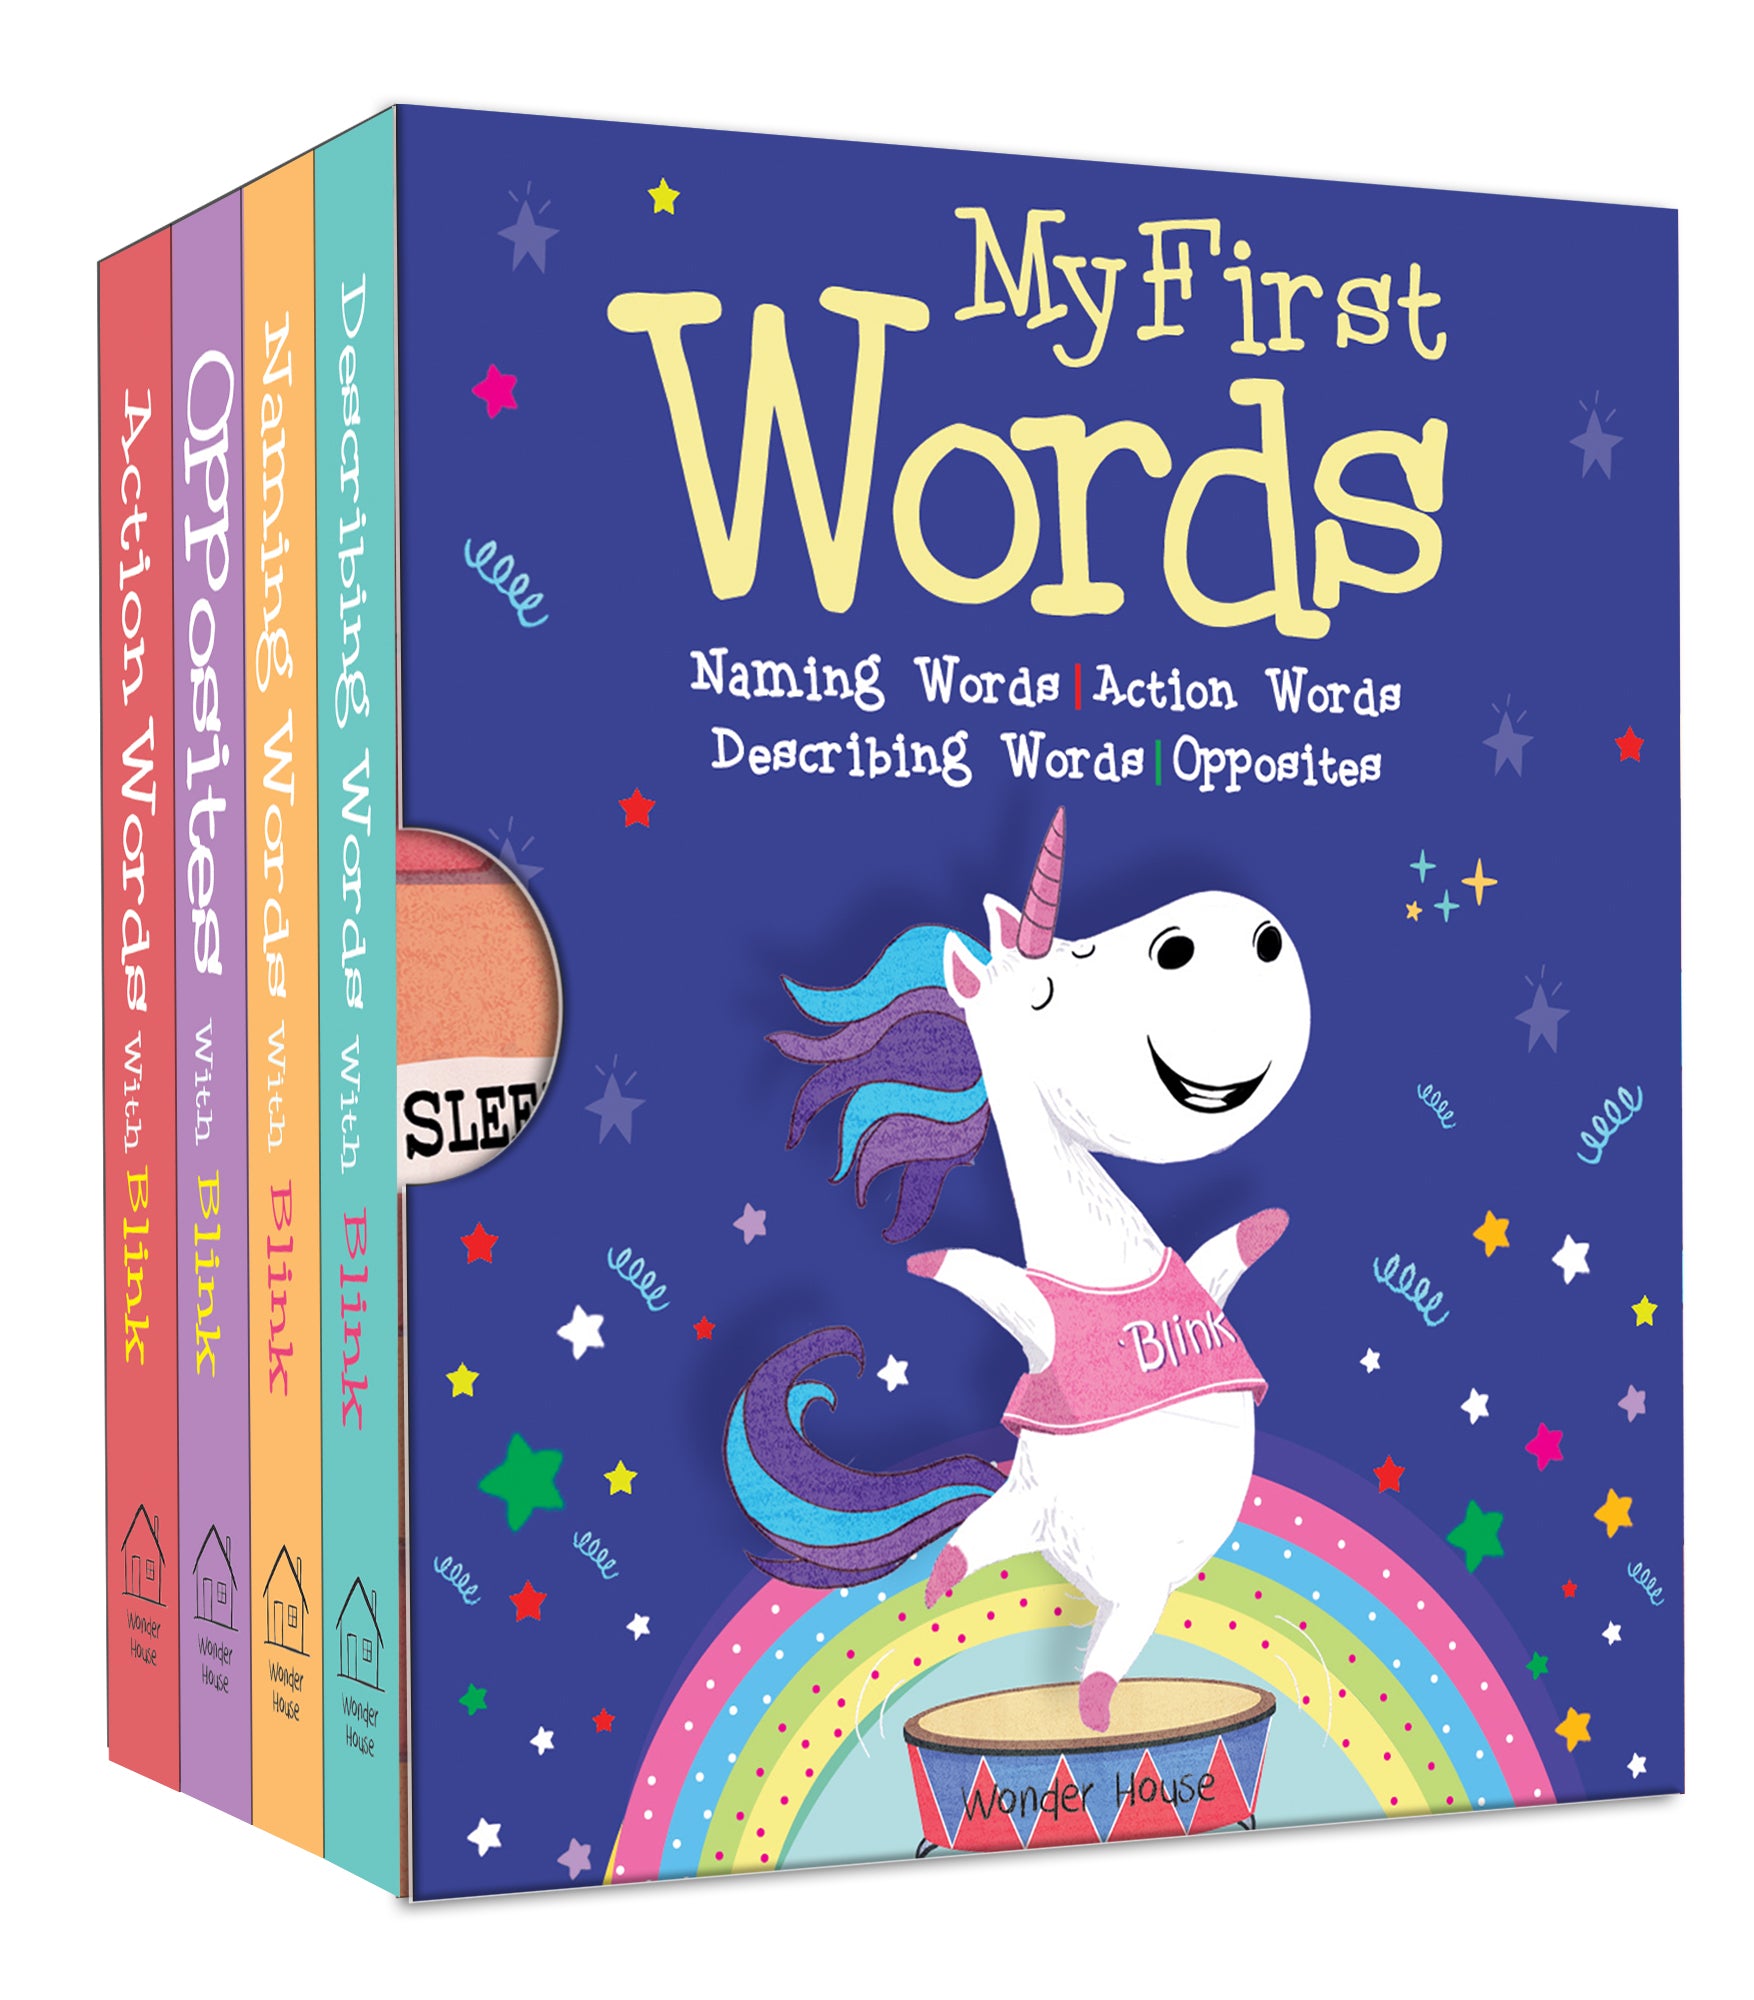 My First Words: Naming words, Action Words, Describing Words, Opposite Words - Box Set of 4 Board Books